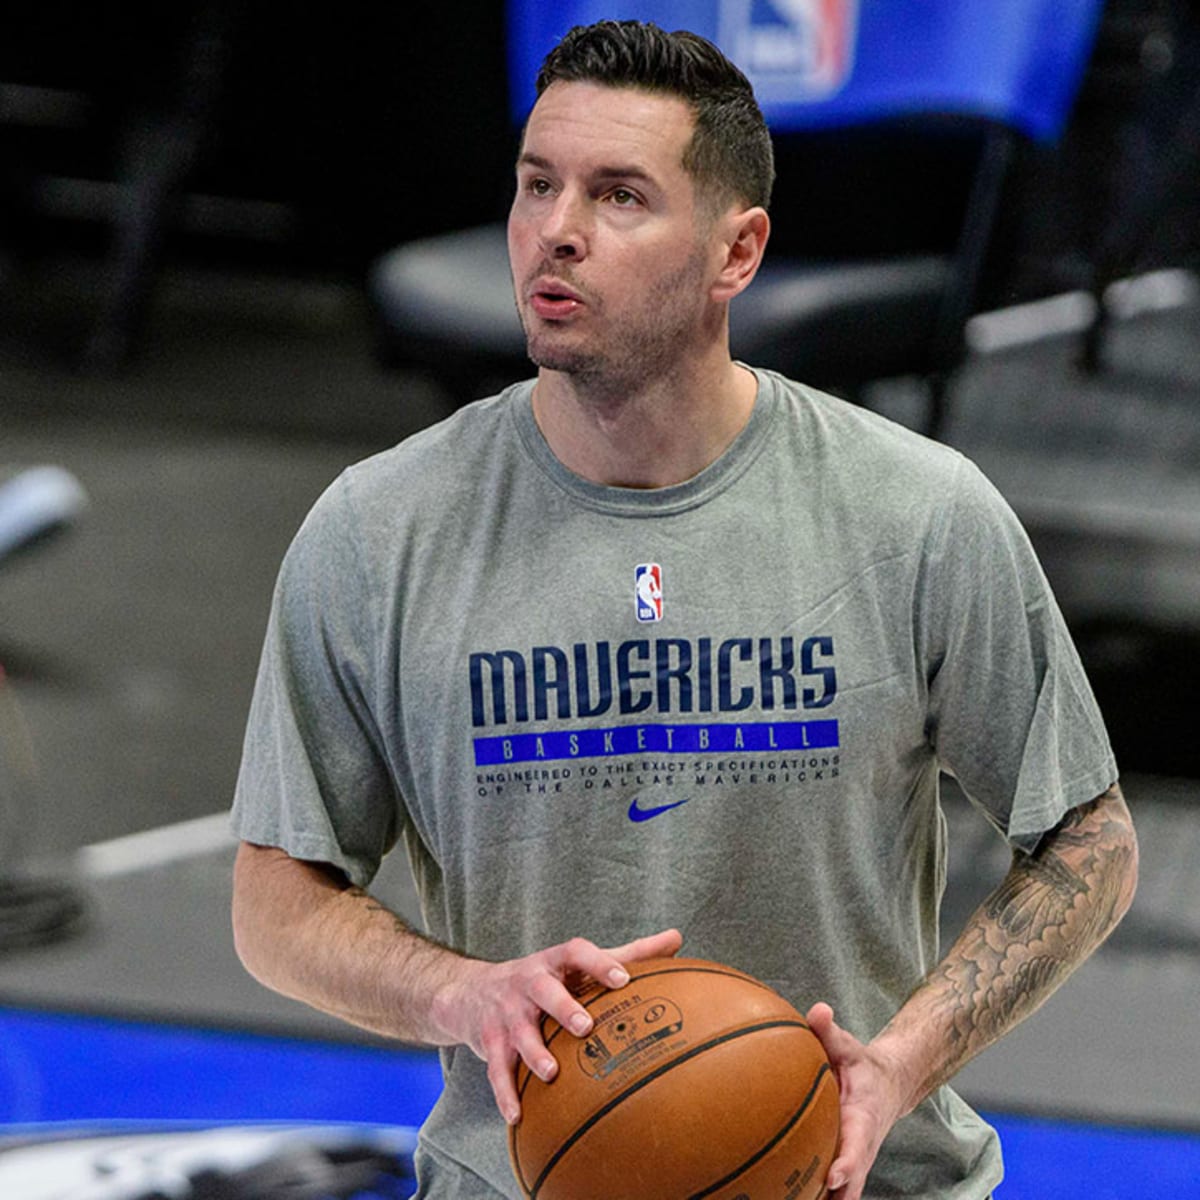 JJ Redick retiring from NBA after 15 seasons - Sports Illustrated